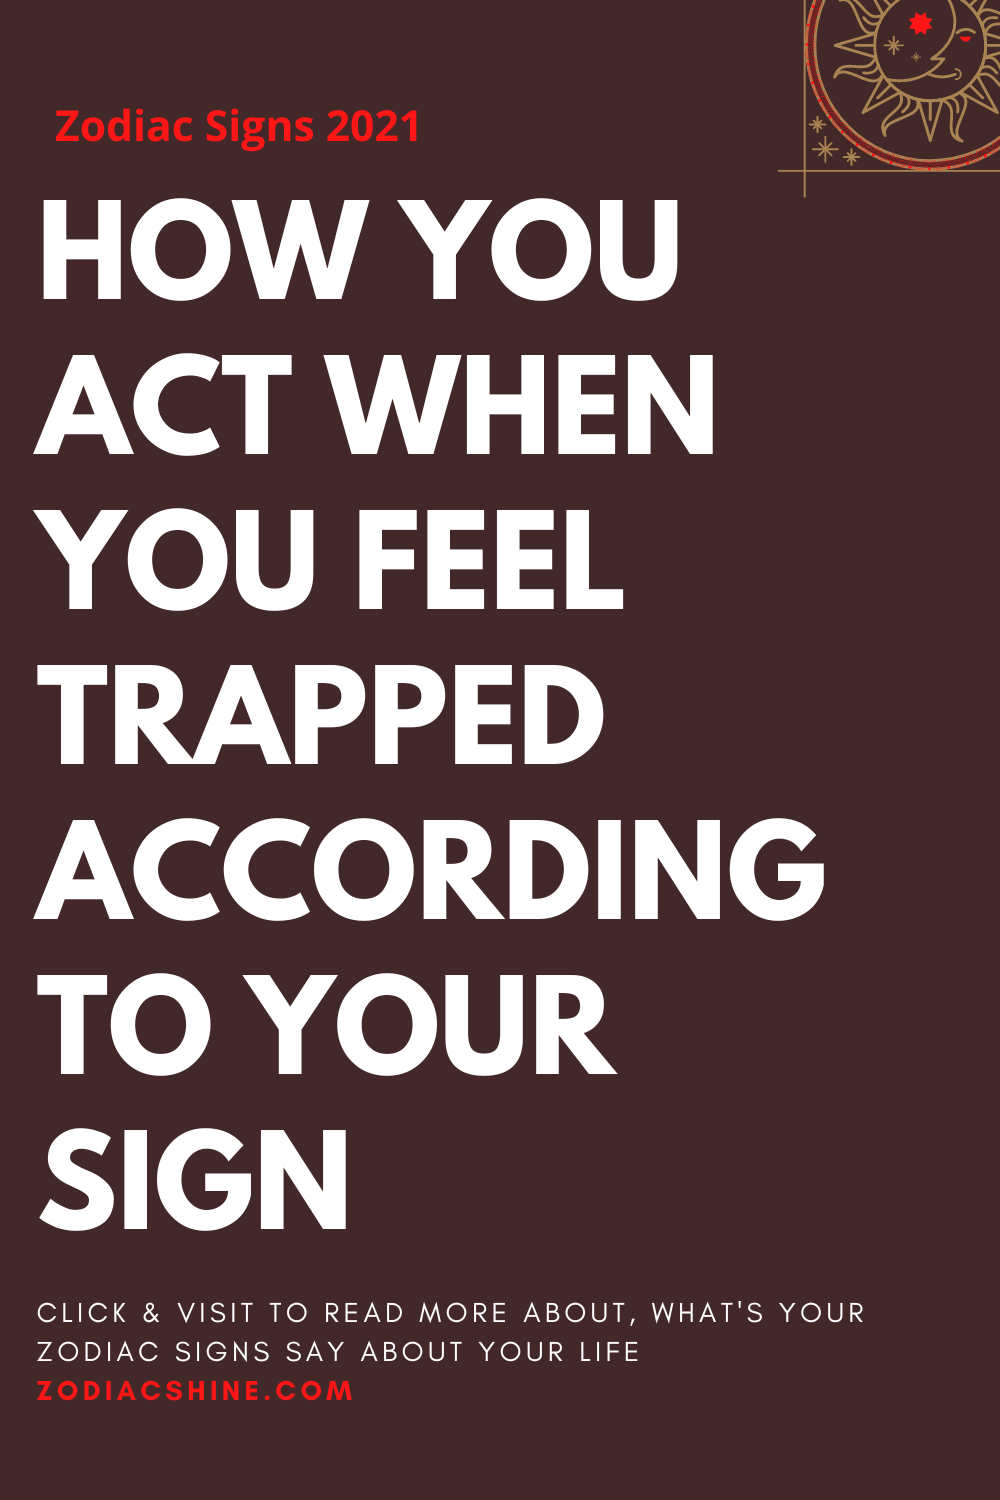 HOW YOU ACT WHEN YOU FEEL TRAPPED ACCORDING TO YOUR SIGN